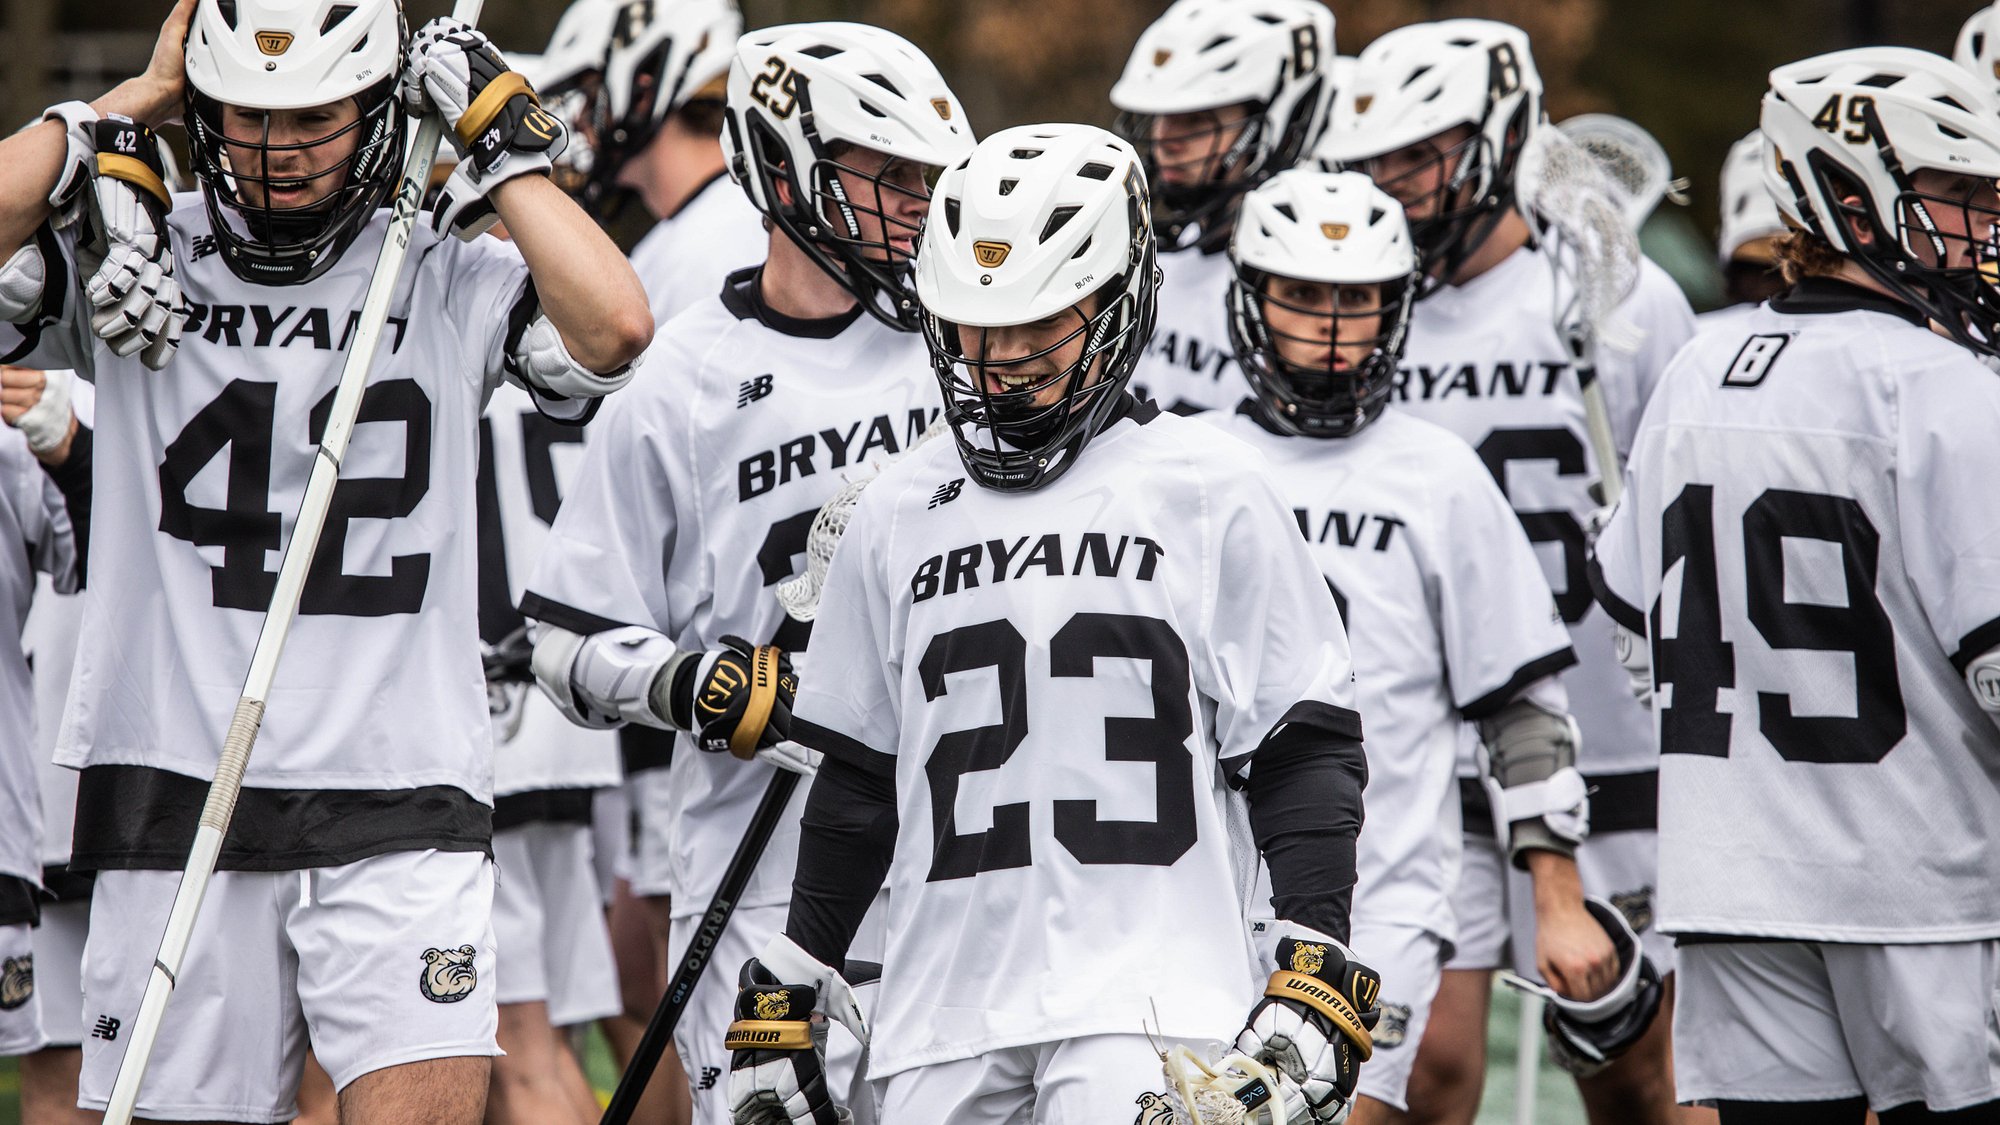 Bryant hosts UAlbany Saturday afternoon at Beirne